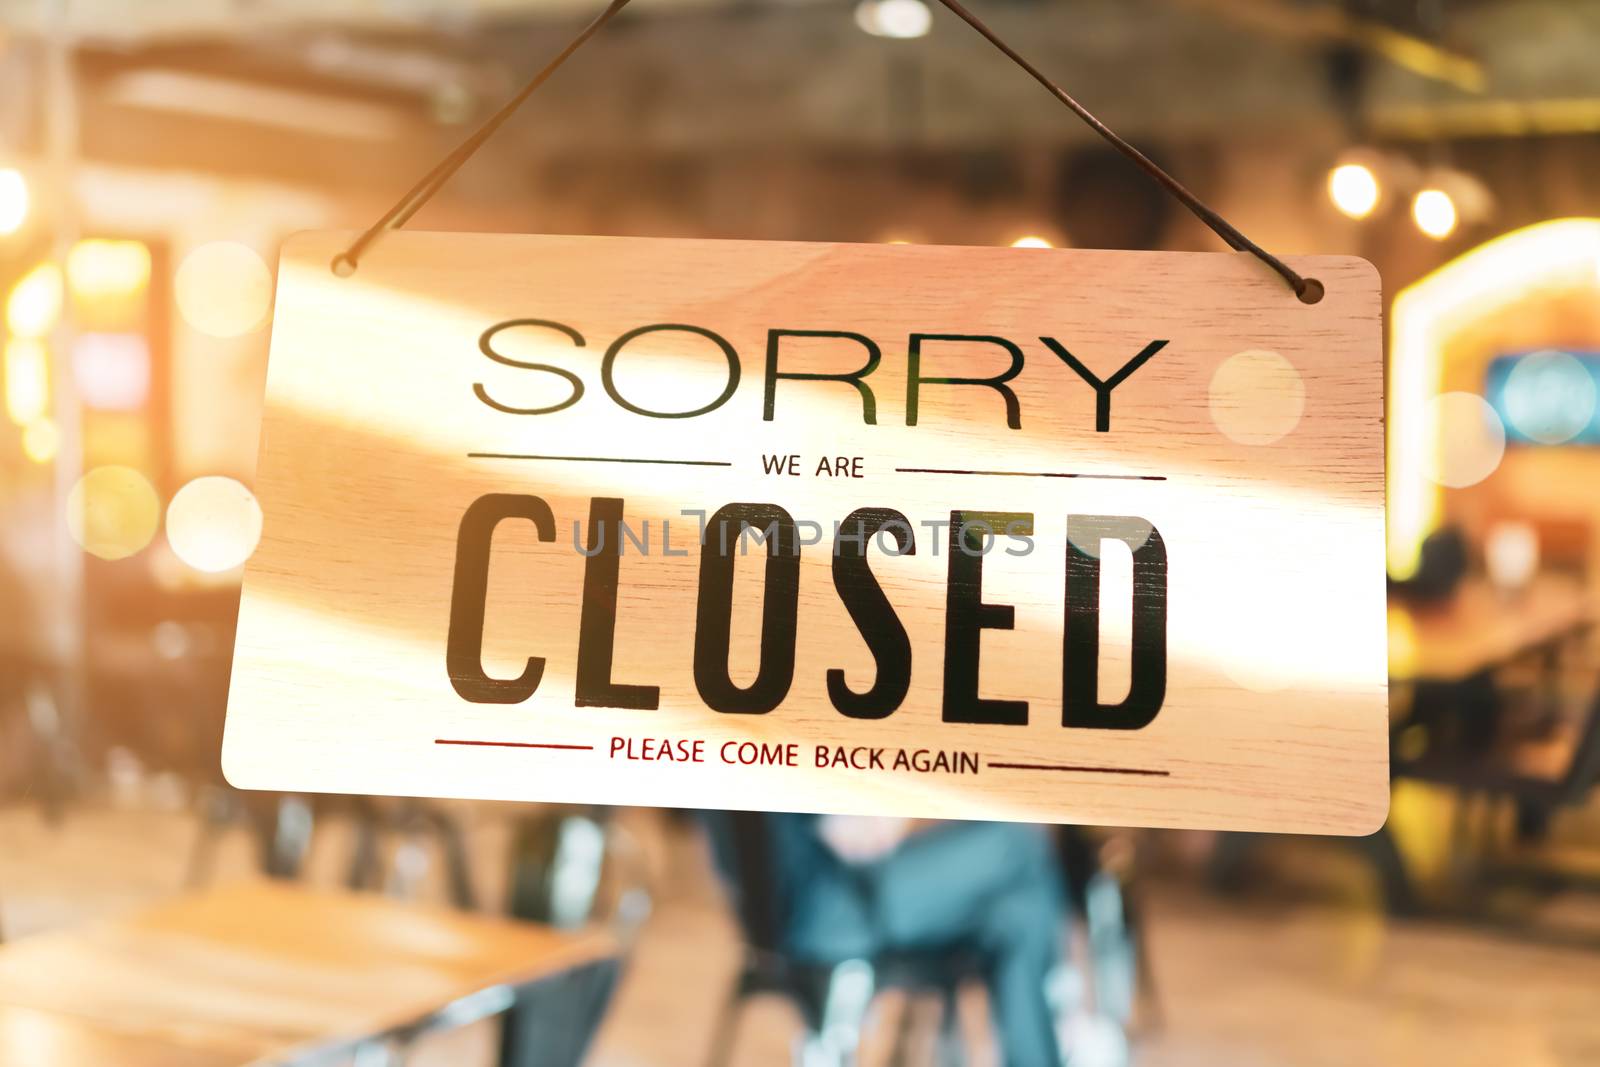 Sorry we are closed sign hang on door of business shop. by Suwant